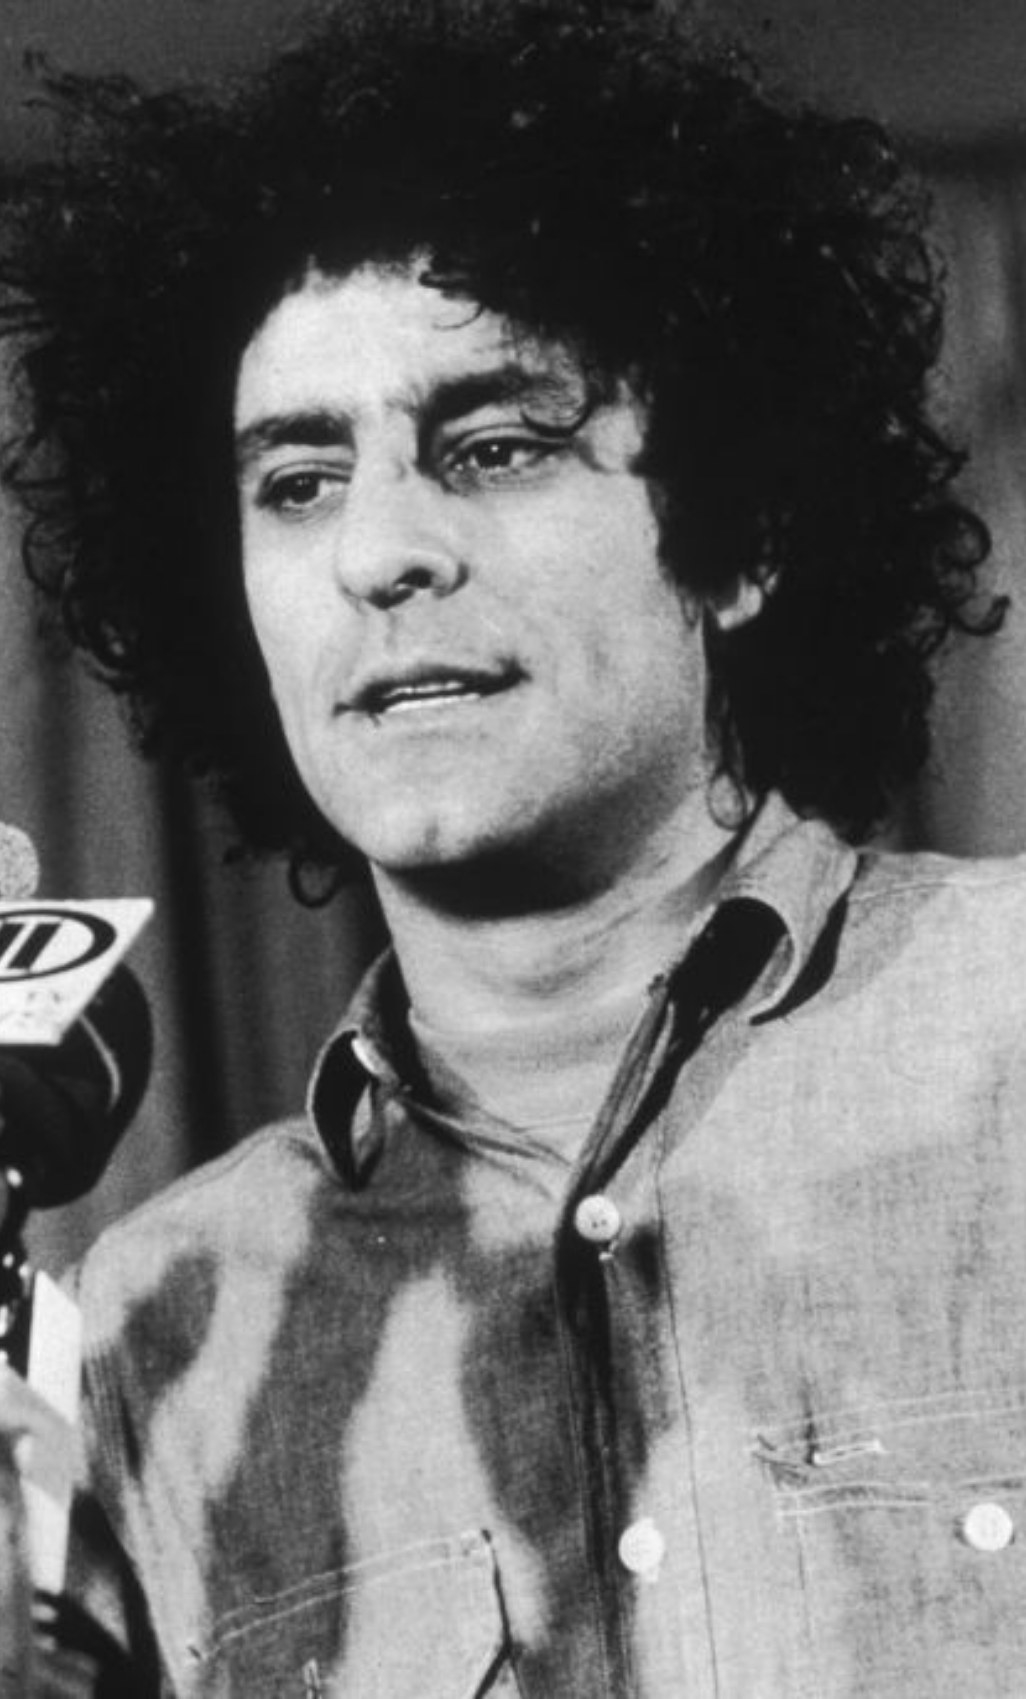 Hoffman speaking at a press conference in 1969